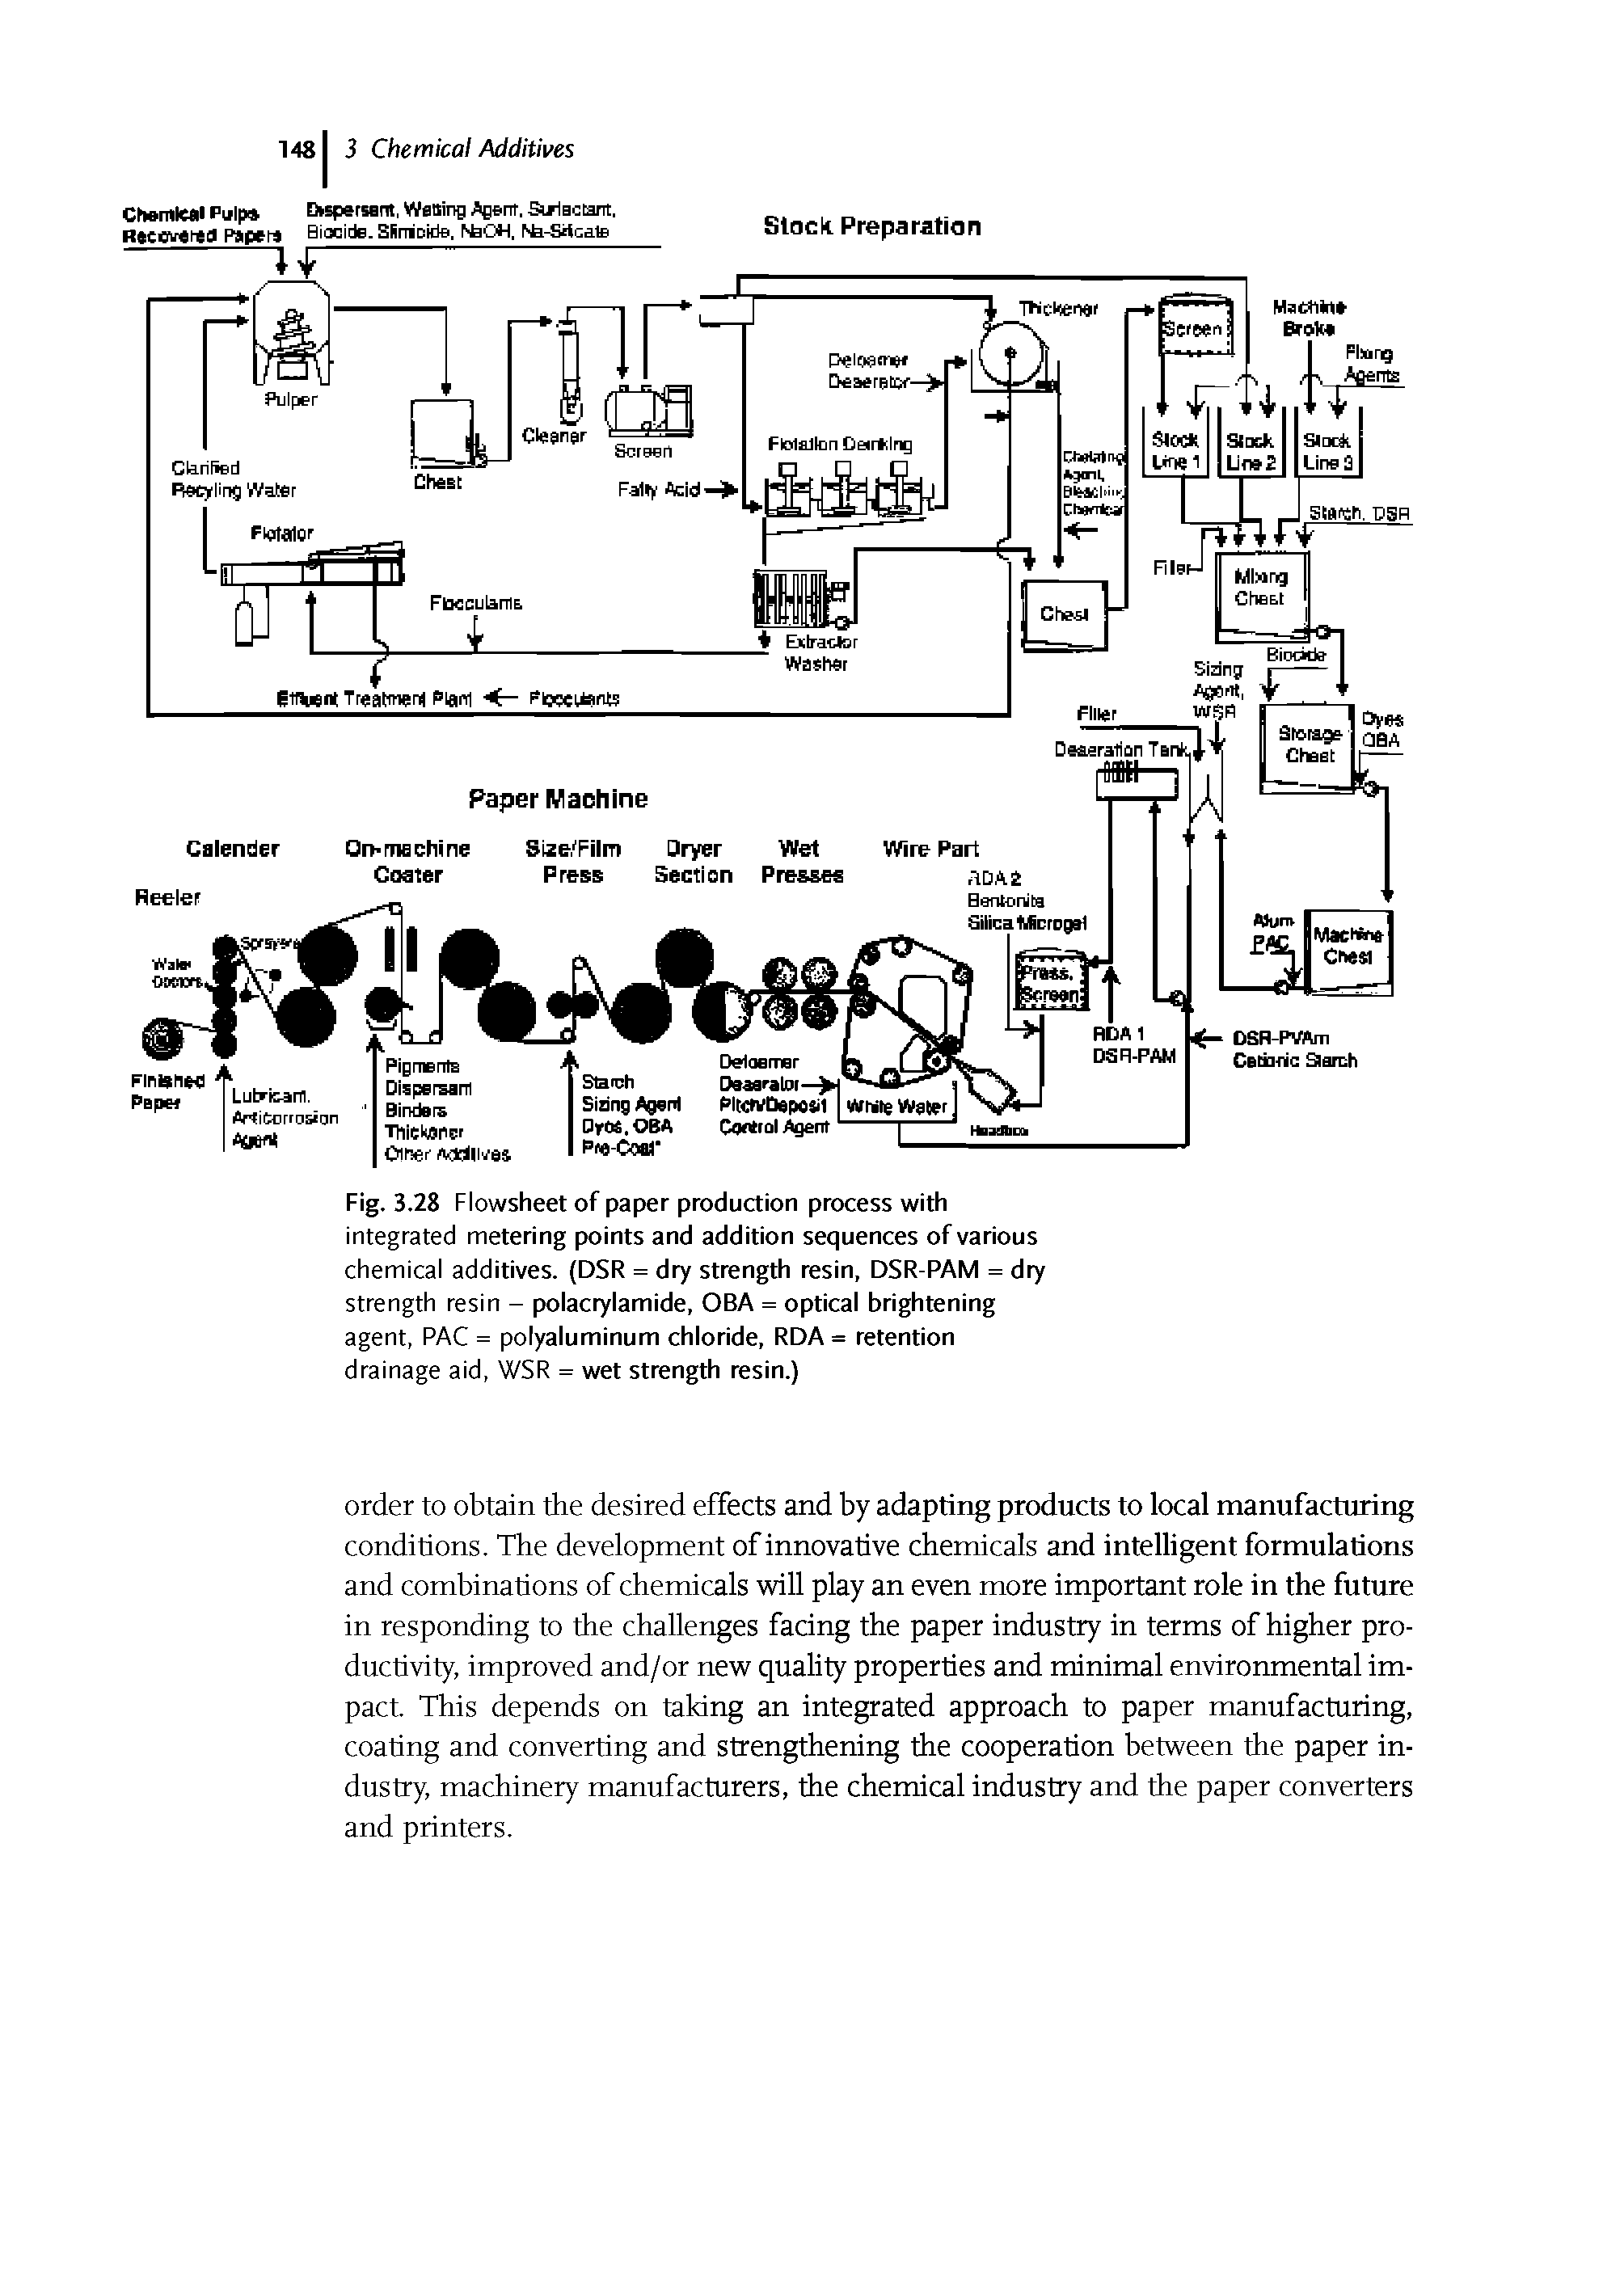 Fig. 3.28 Flowsheet of paper production process with integrated metering points and addition sequences of various chemical additives. (DSR = dry strength resin, DSR-PAM = dry strength resin - poiacryiamide, OBA = opticai brightening agent, PAC = polyaiuminum chioride, RDA = retention drainage aid, WSR = wet strength resin.)...